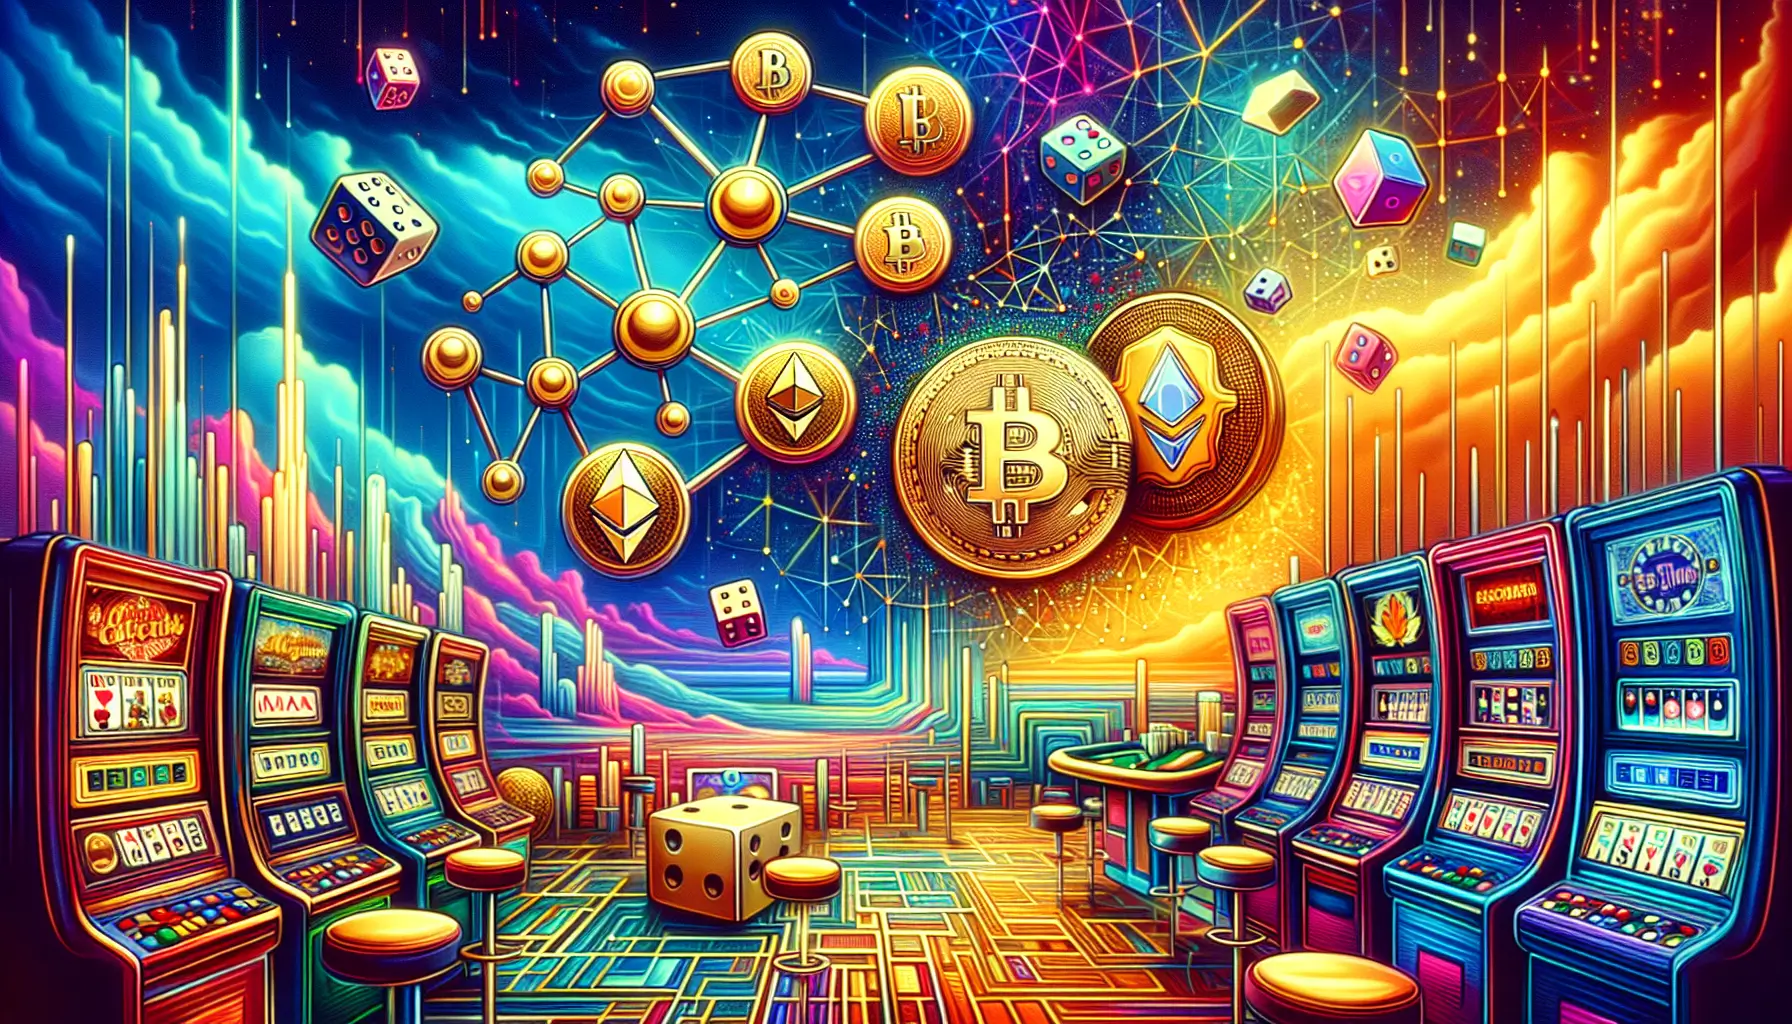 Apply Any Of These 10 Secret Techniques To Improve BC Game Cryptocurrency Casino: A New Era of Digital Gaming